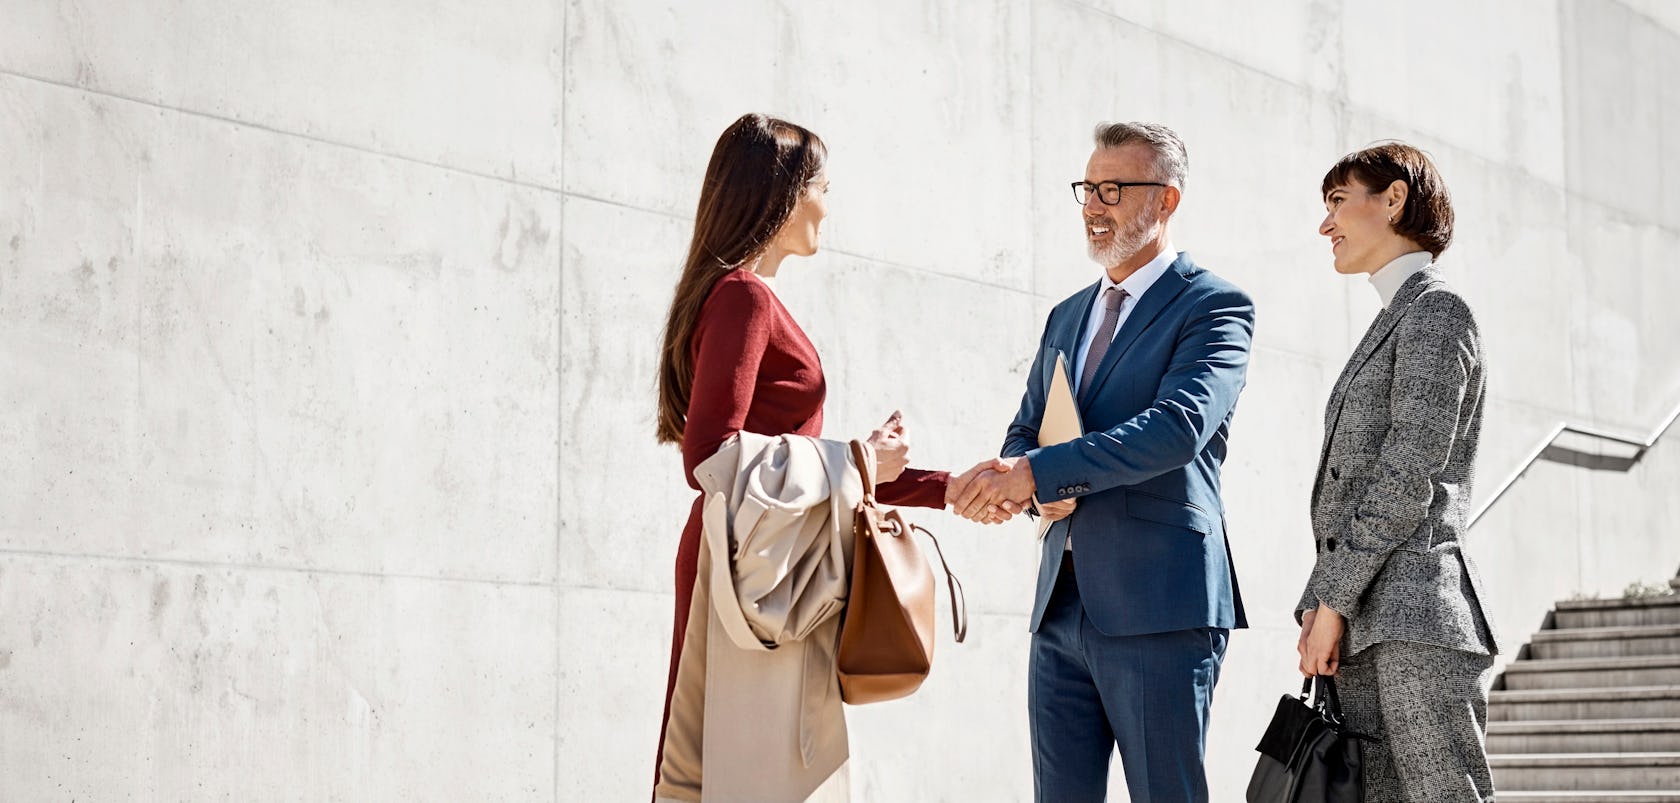 stylish male and female business professionals shaking hands outside a modern office building on a sunny day symbolizing richardson's deep alliance partnerships in the sales improvement industry